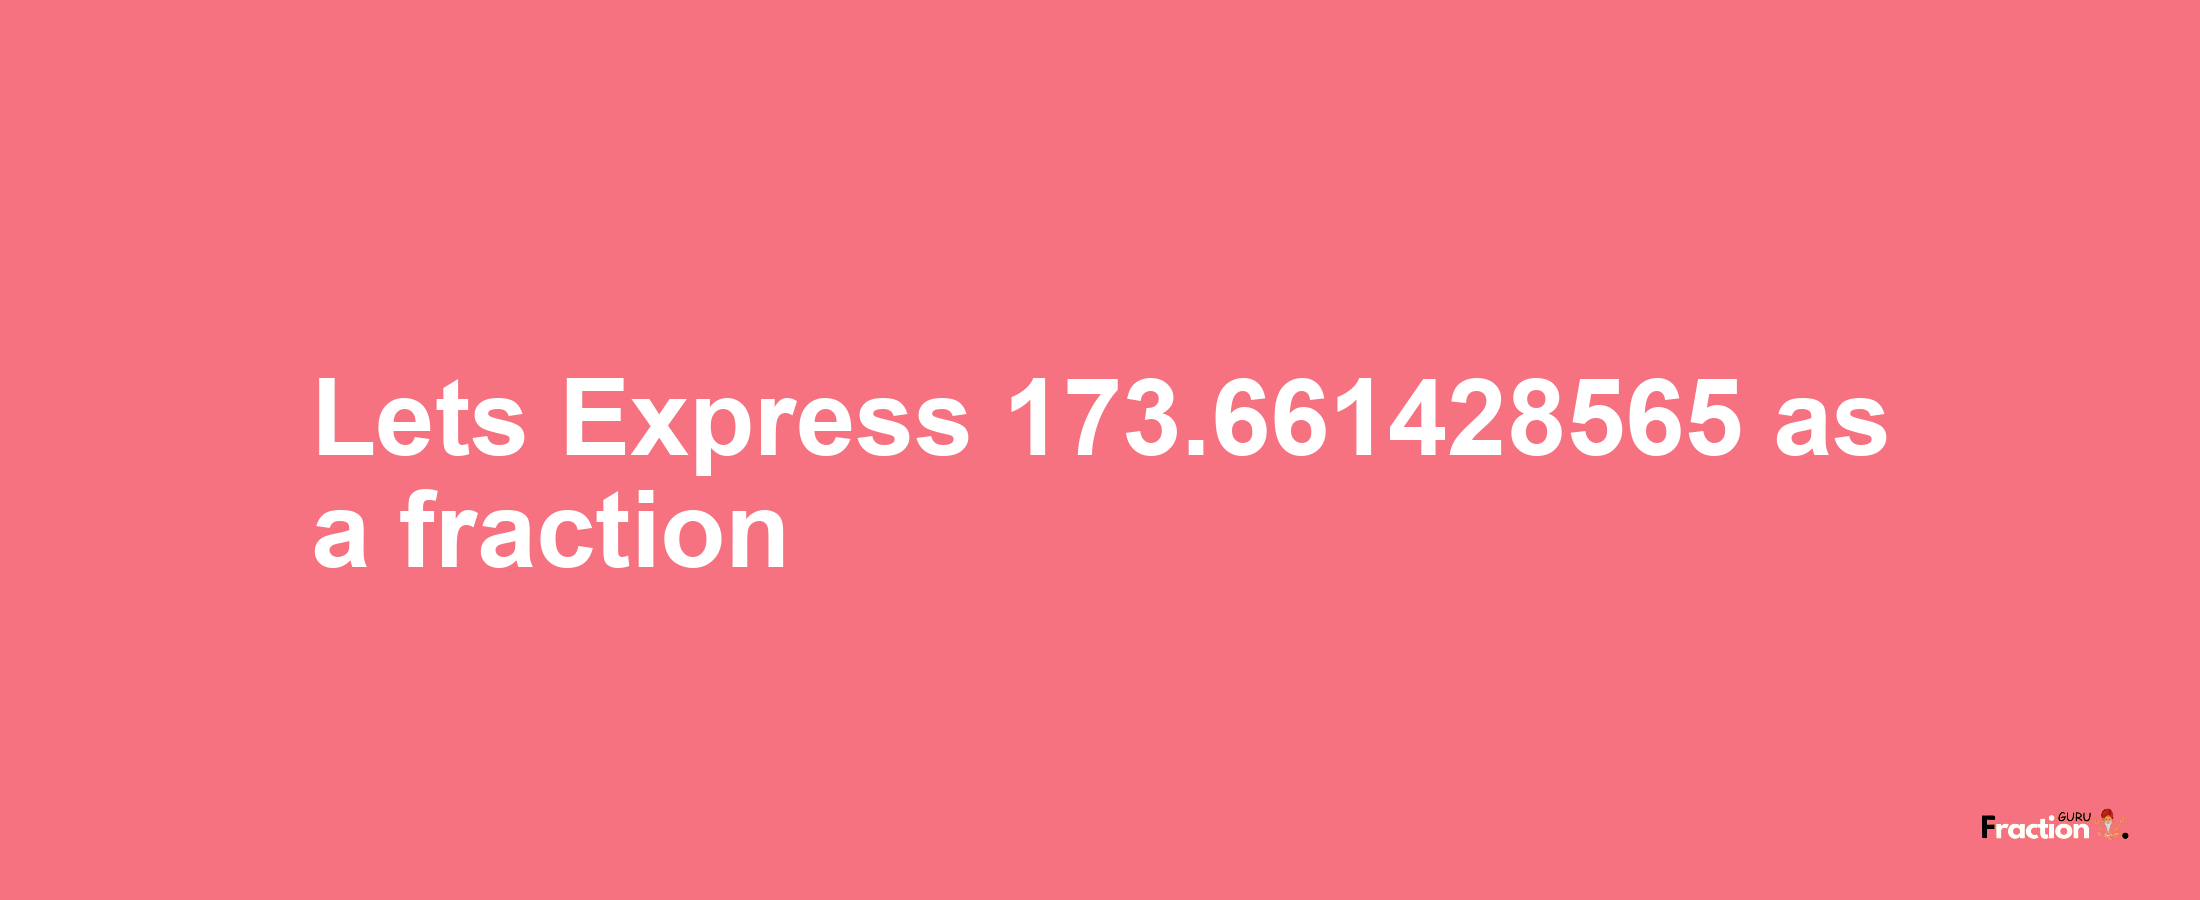 Lets Express 173.661428565 as afraction